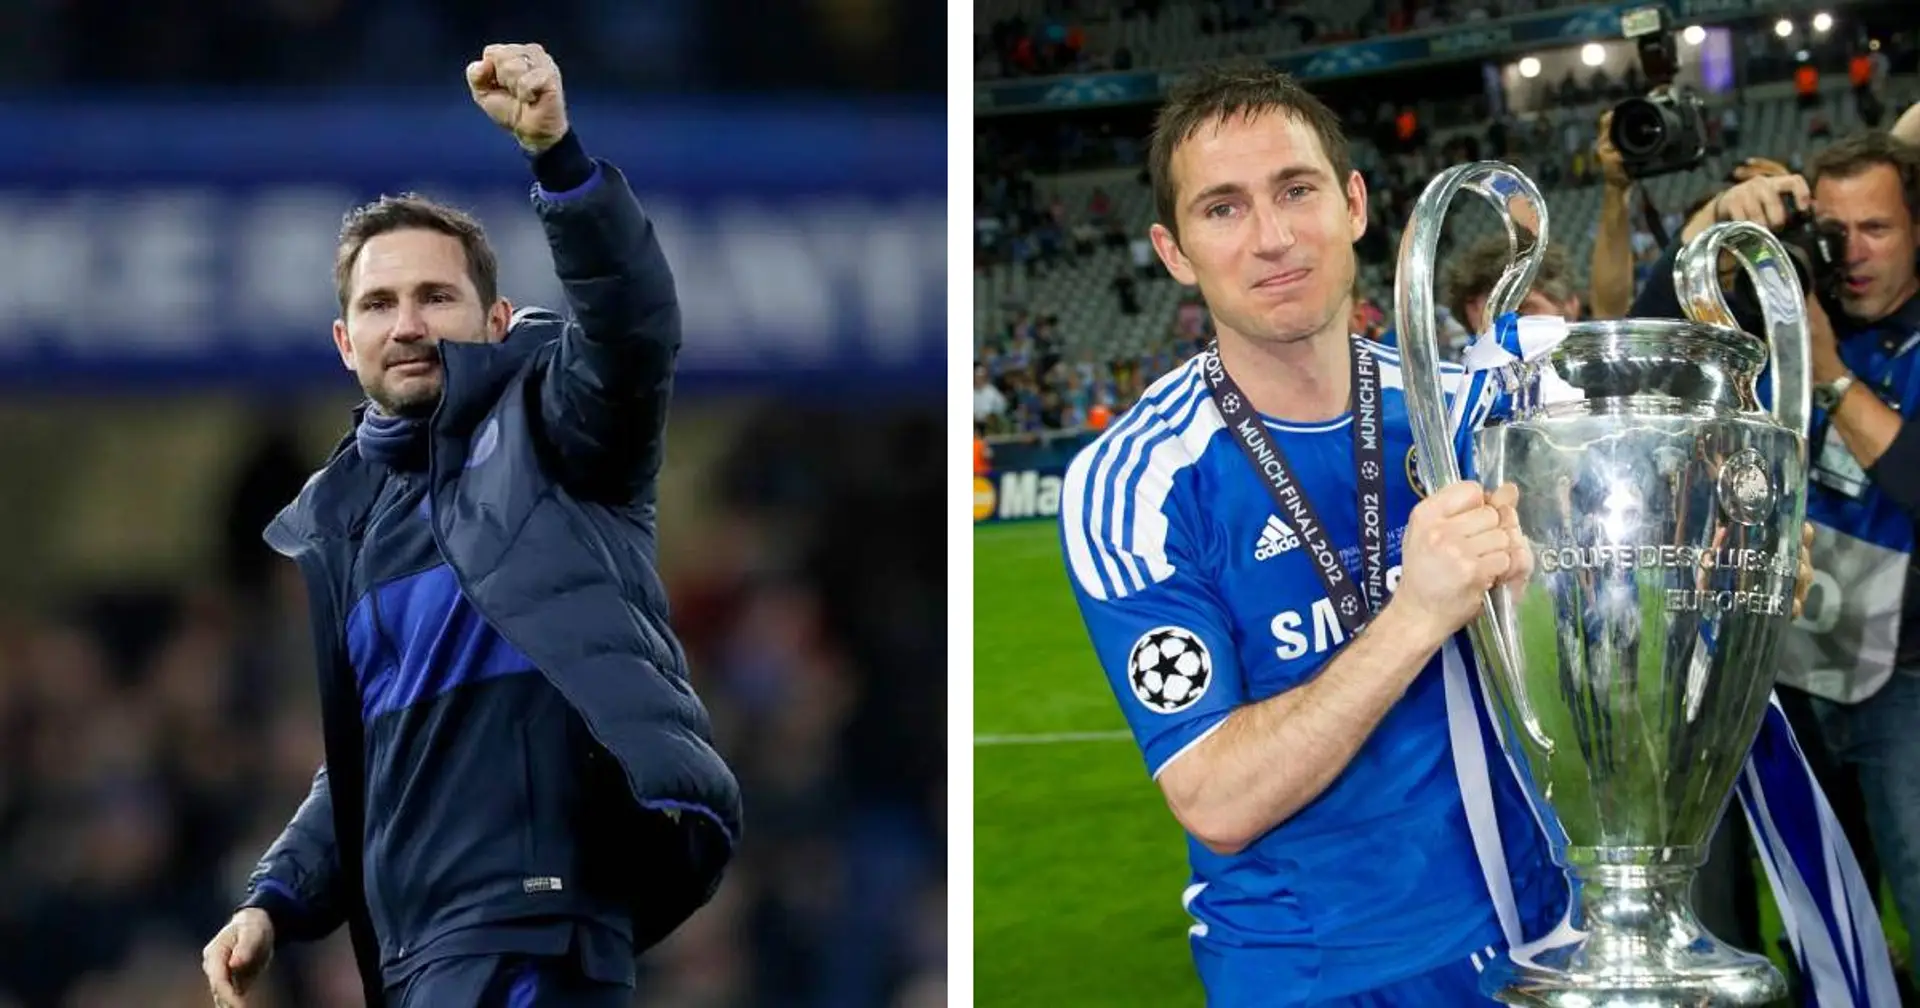 'We're here to take over': Chelsea have won 4 CL games in a row first time since 2011/12 campaign, fans are over the moon